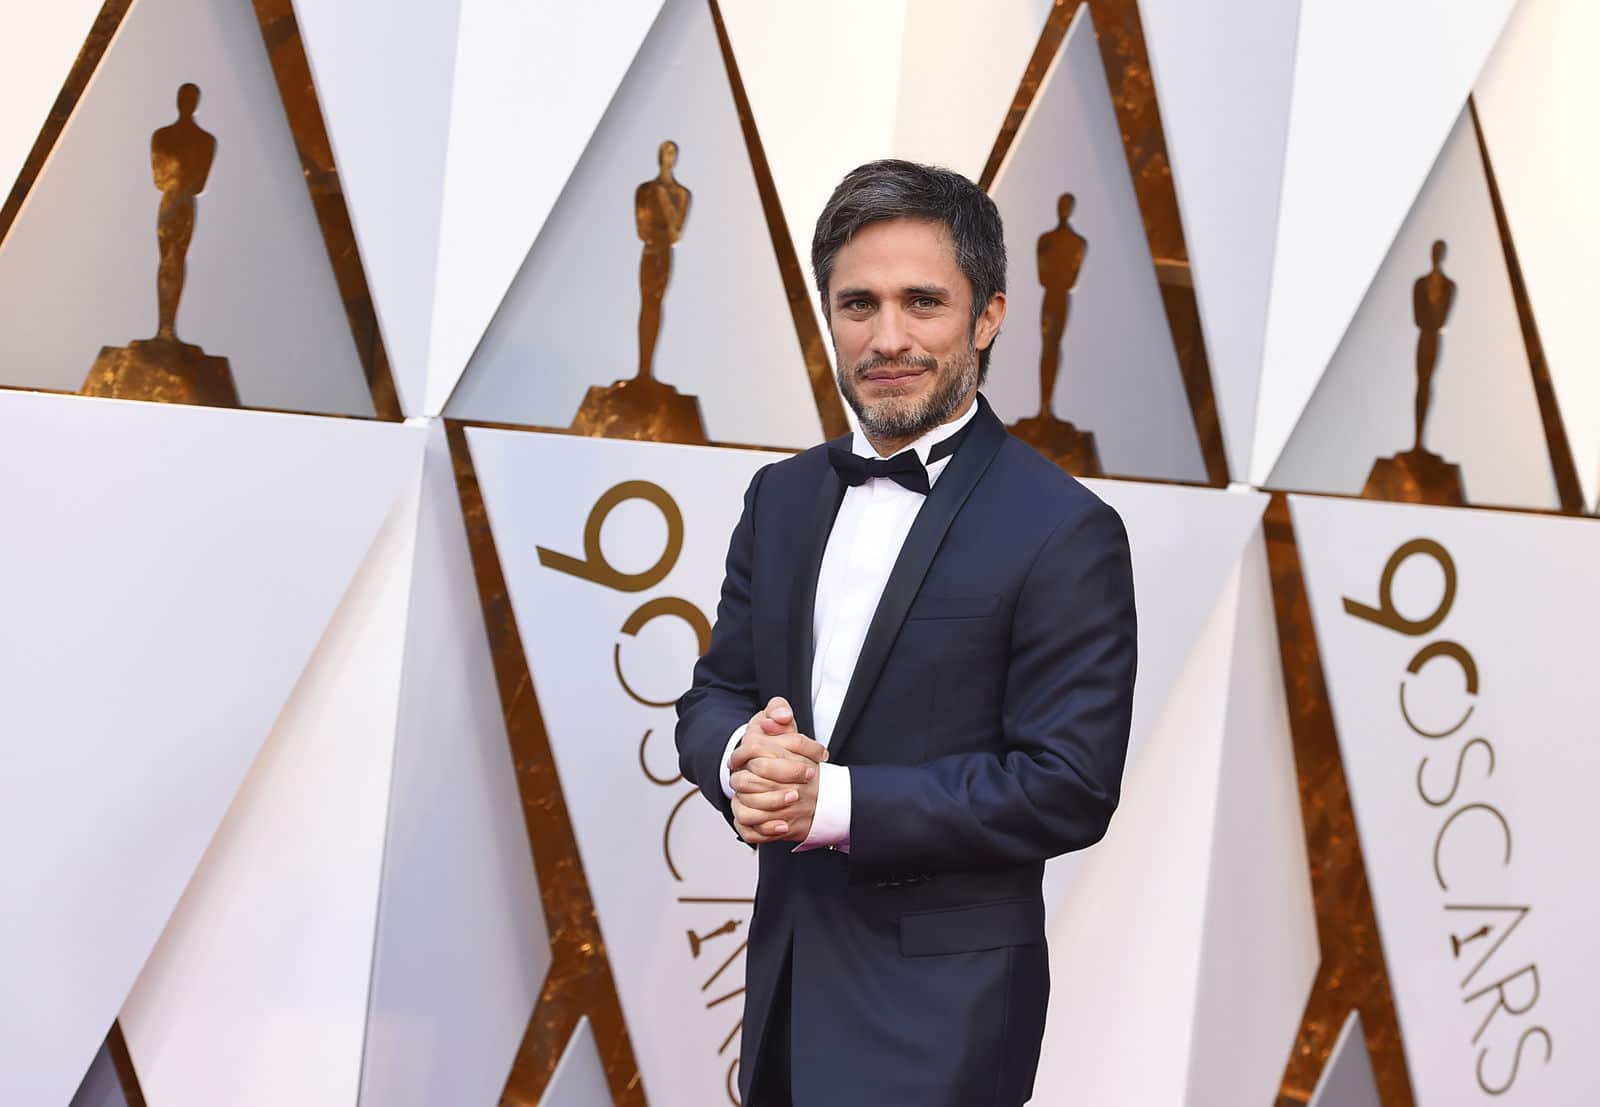 Gael Garcia Bernal arrives at the Oscars on Sunday, March 4, 2018, at the Dolby Theatre in Los Angeles. (Photo by Jordan Strauss/Invision/AP)